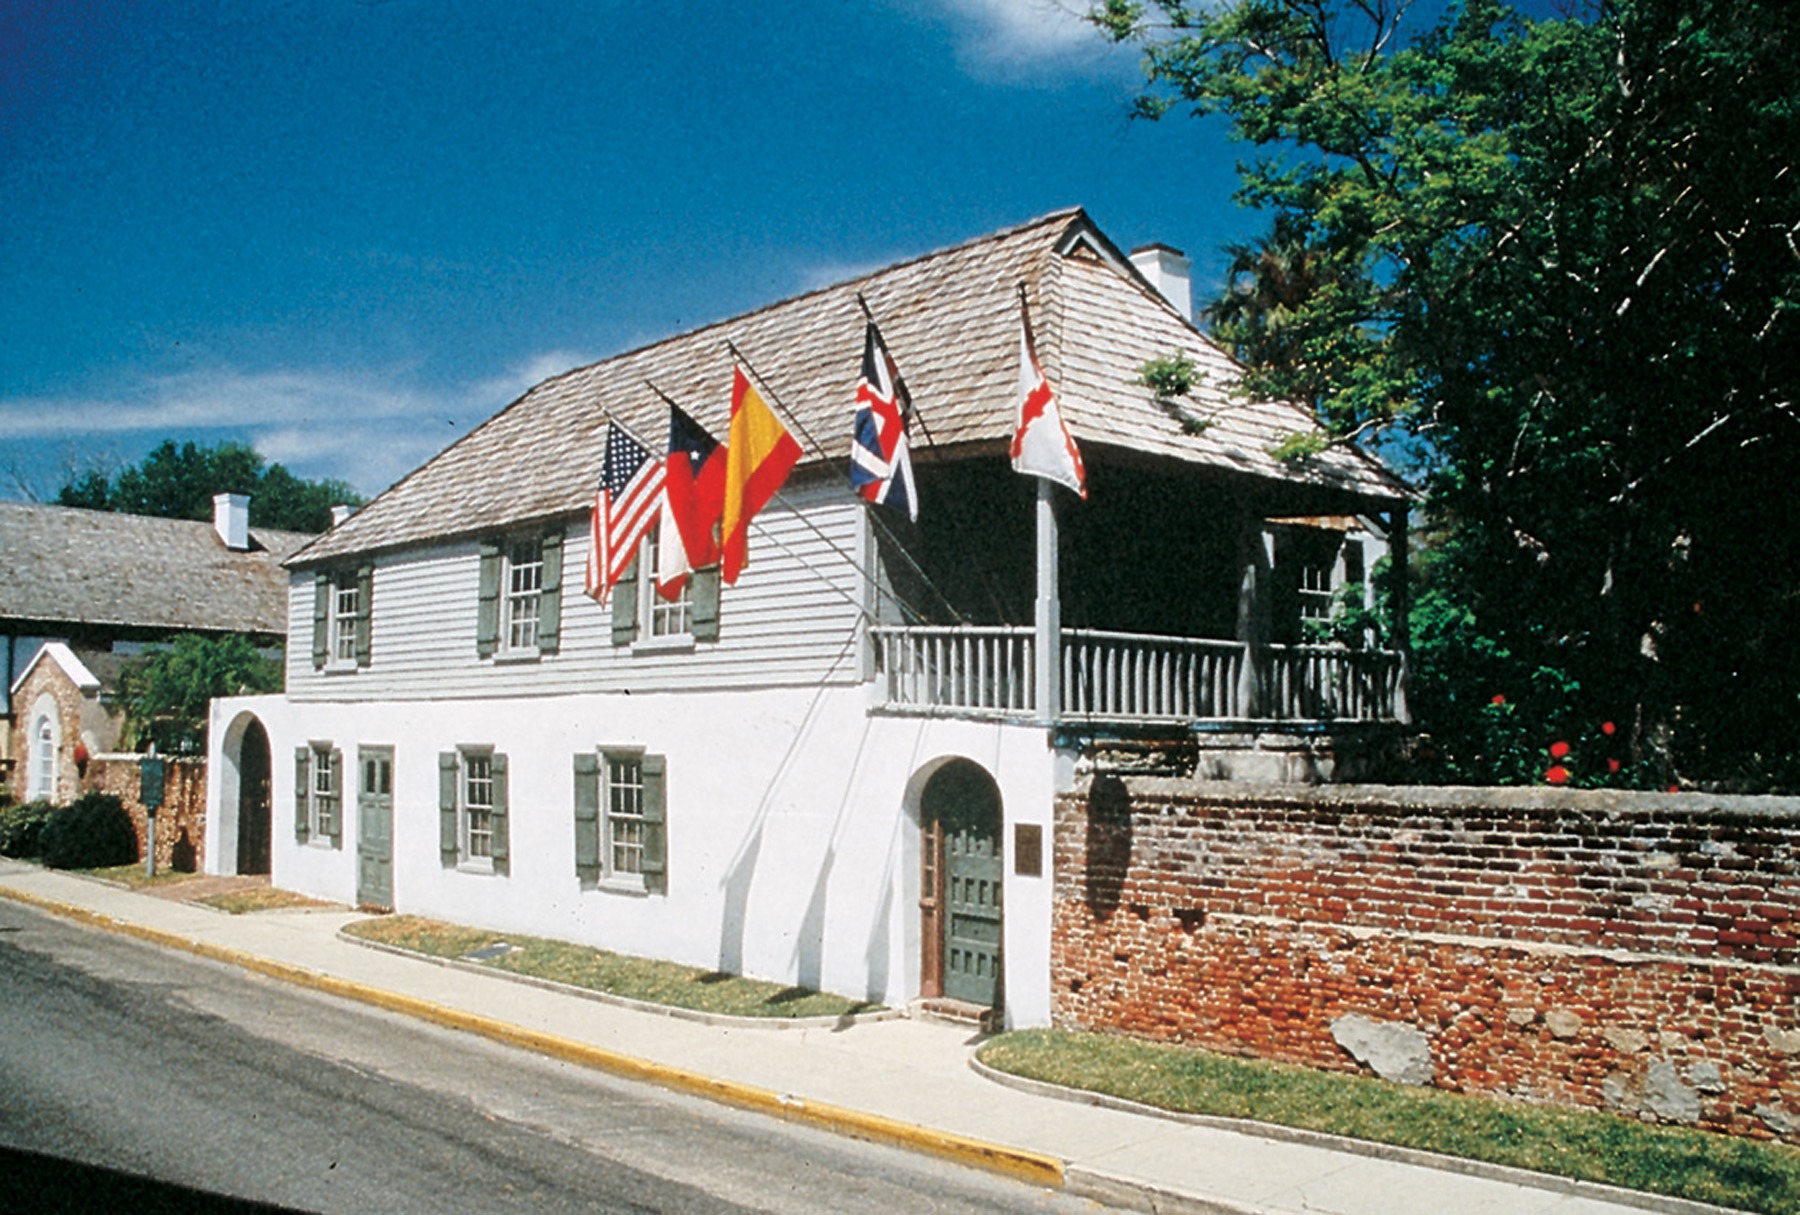 The Gonzalez-Alvarez House, parts of which date back to 1702, is the oldest house in St. Augustine, Florida.